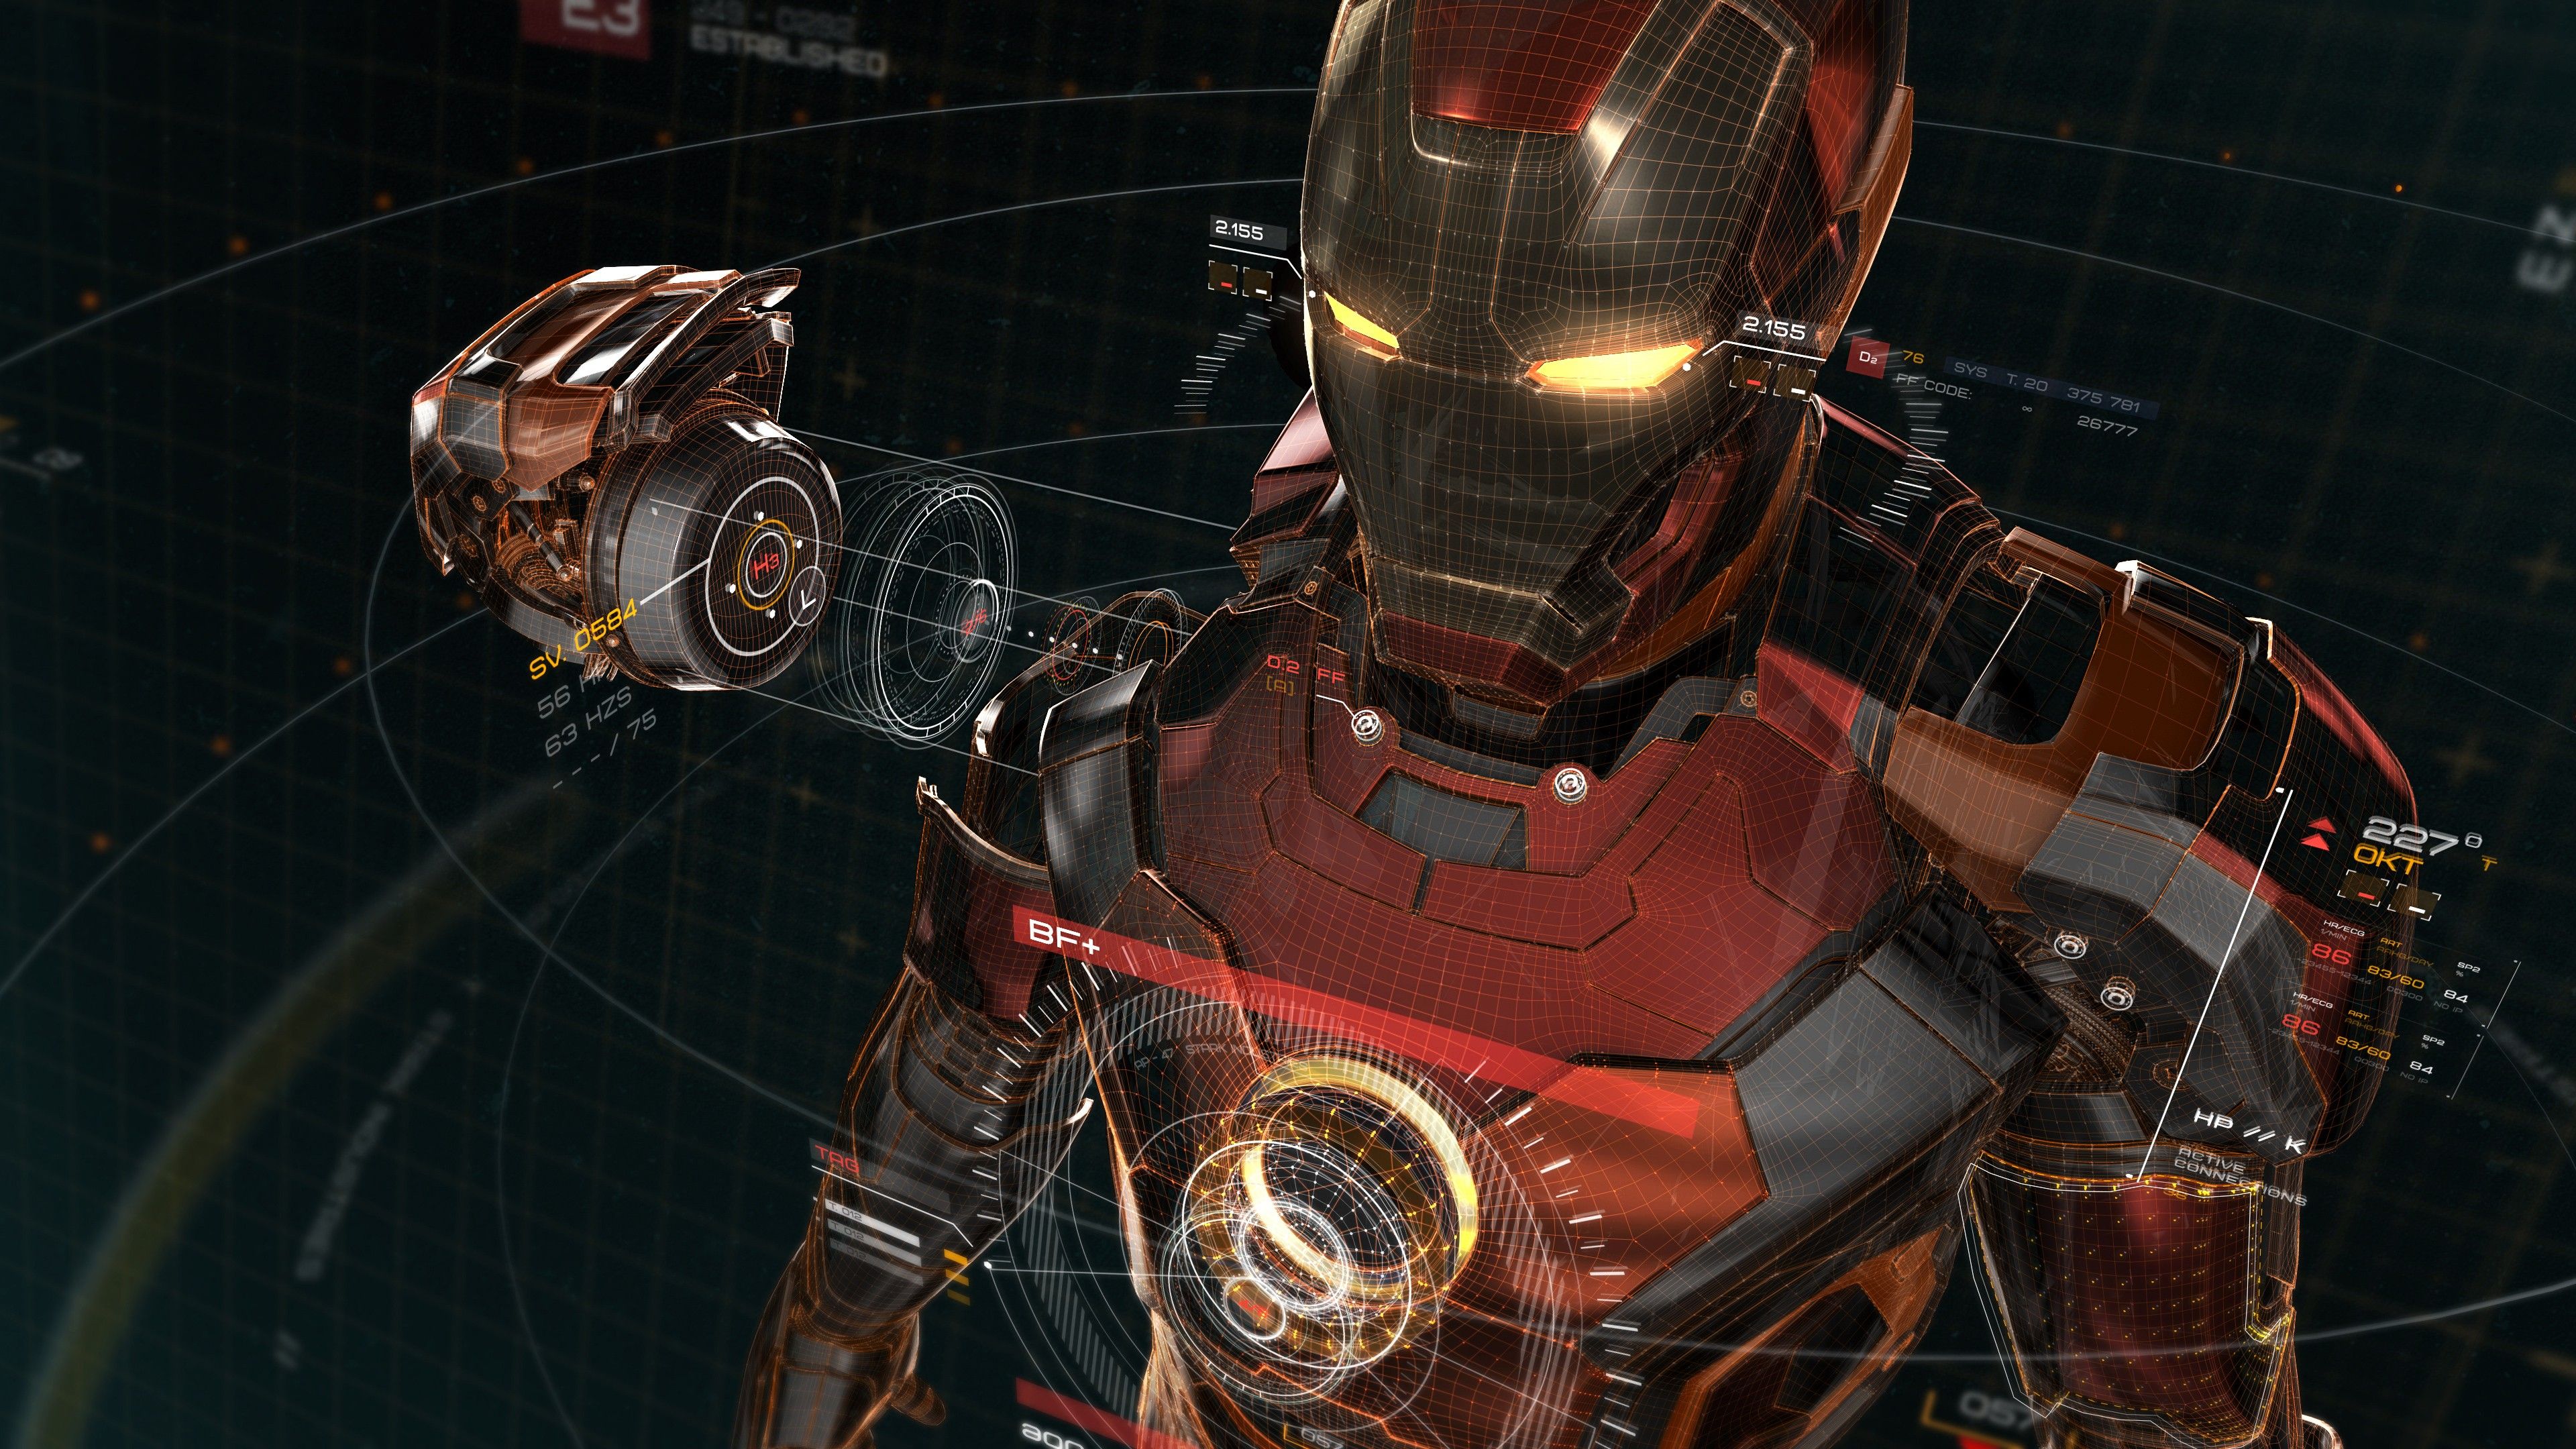 Iron 4K wallpaper for your desktop or mobile screen free and easy to download